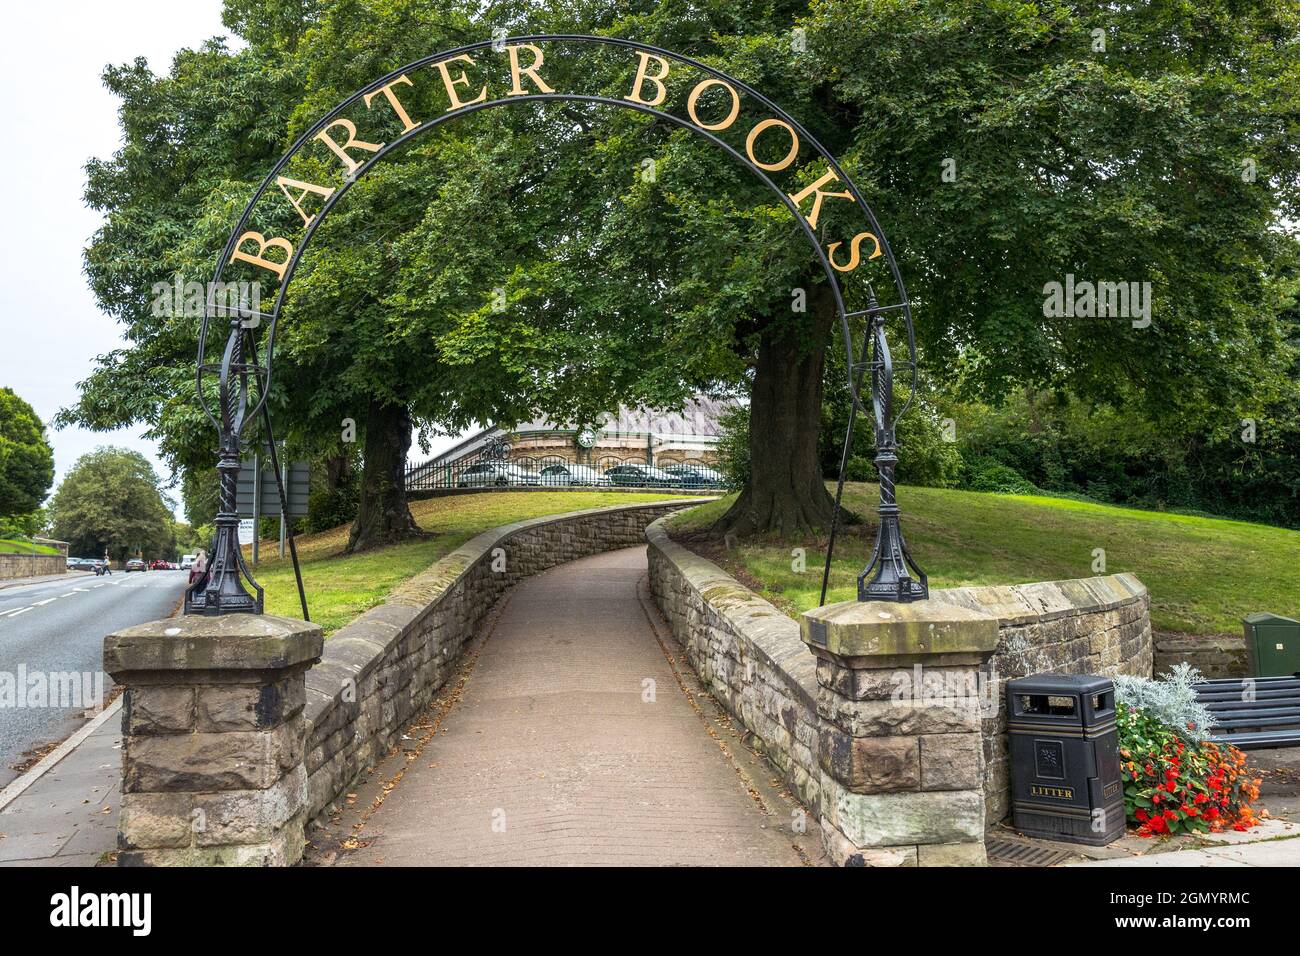 Barter Books metal archway leading to the largest secondhand book store. Stock Photo